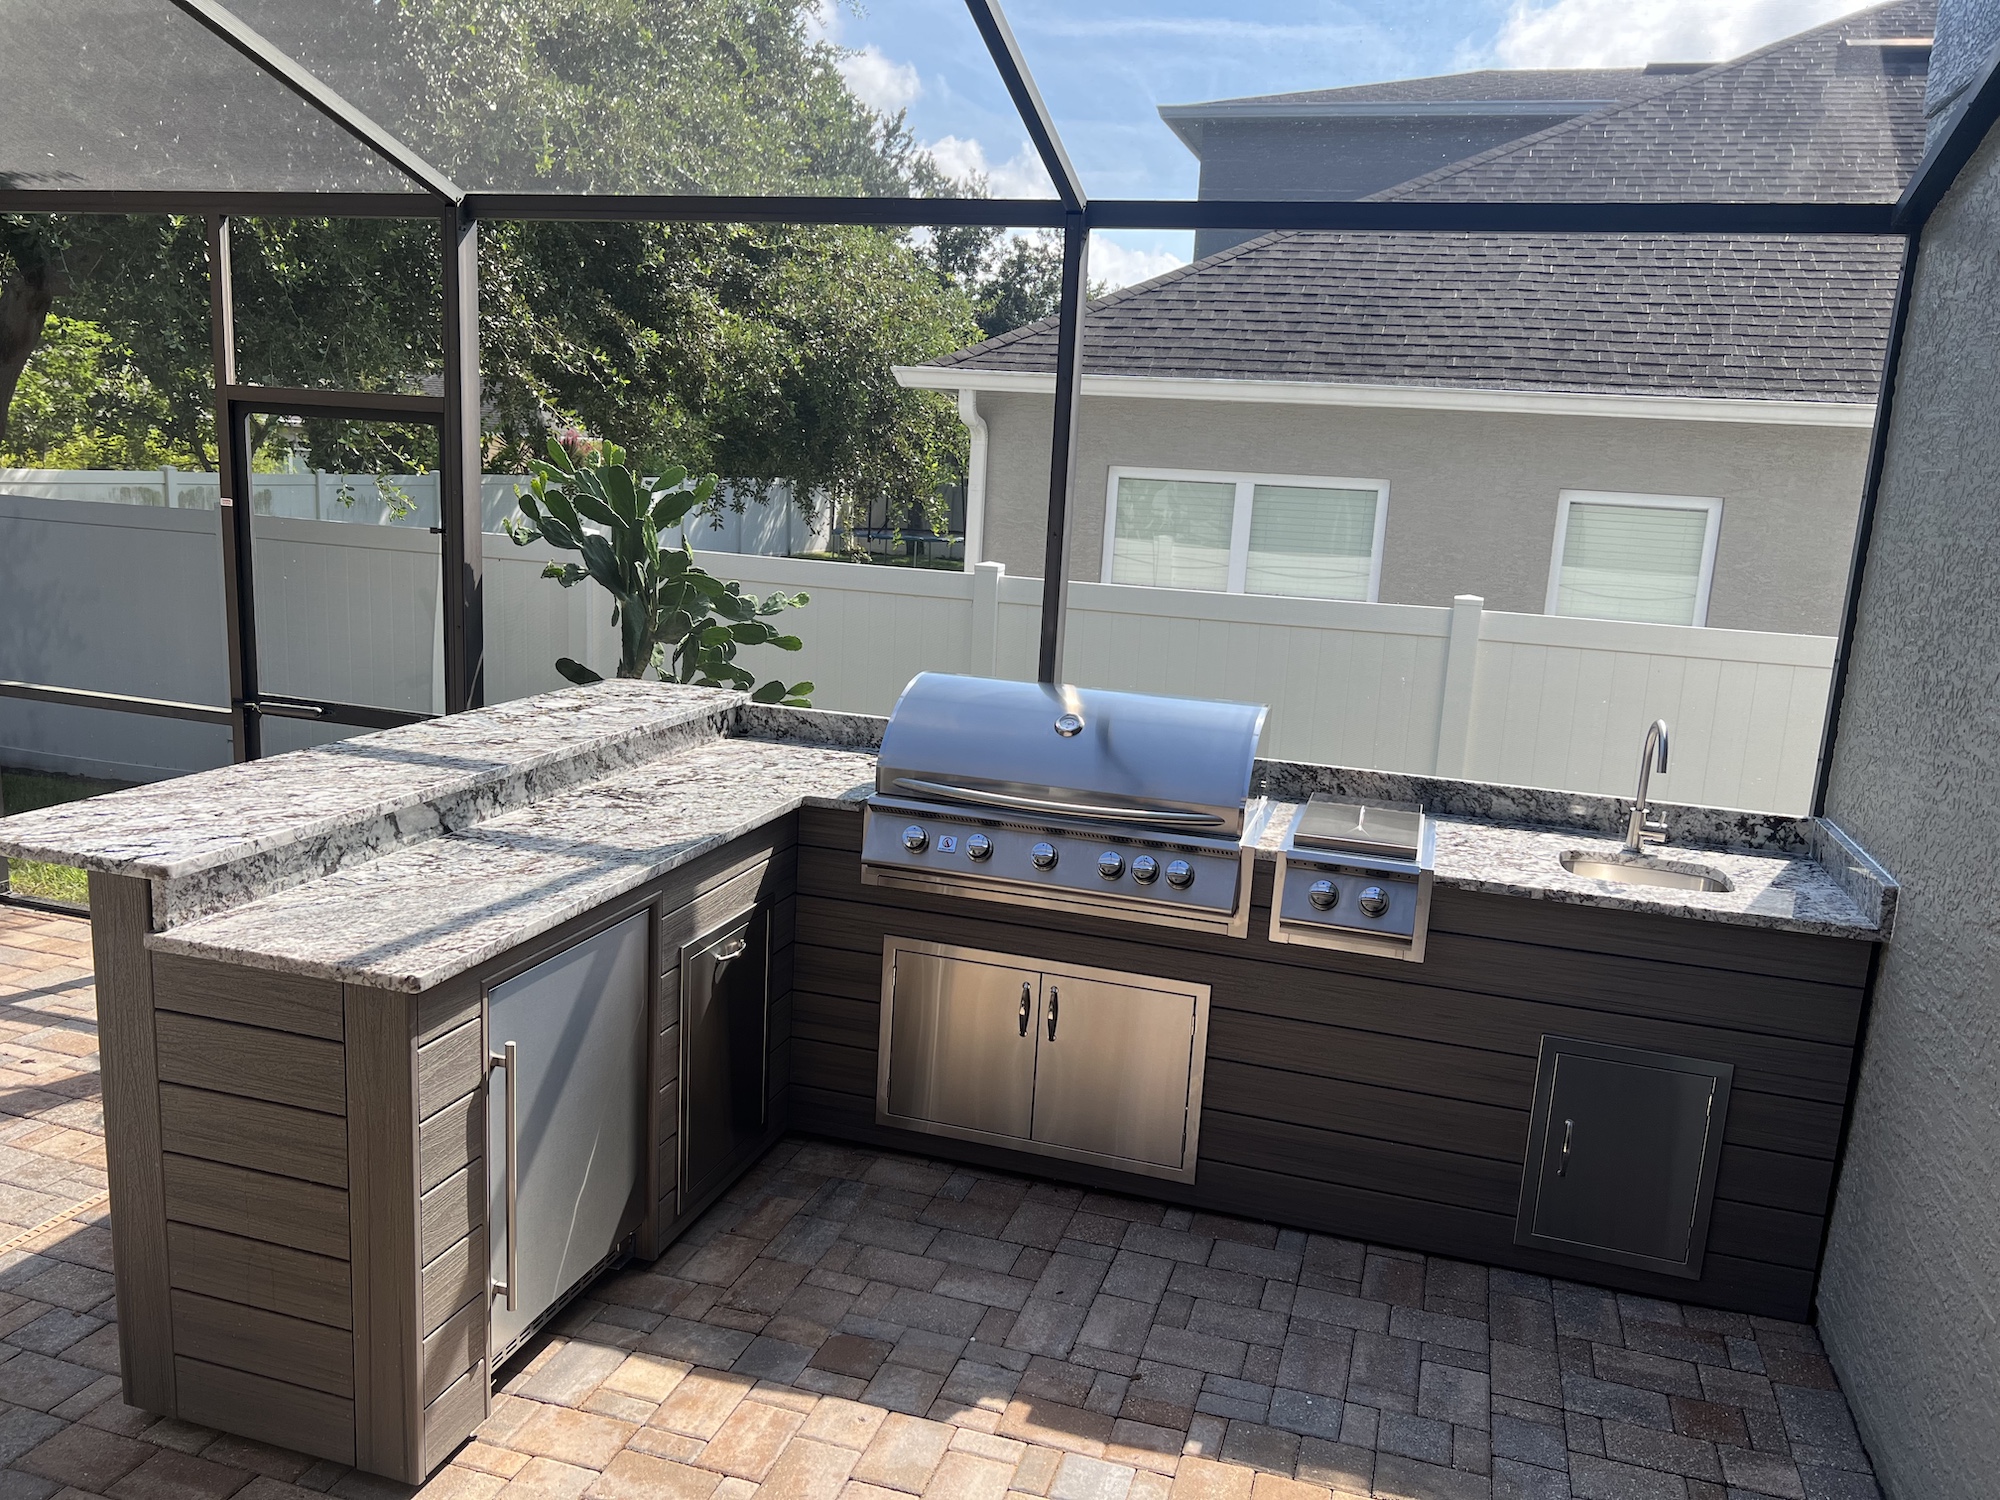 Orlando Outdoor Kitchens - Complete Outdoor Living